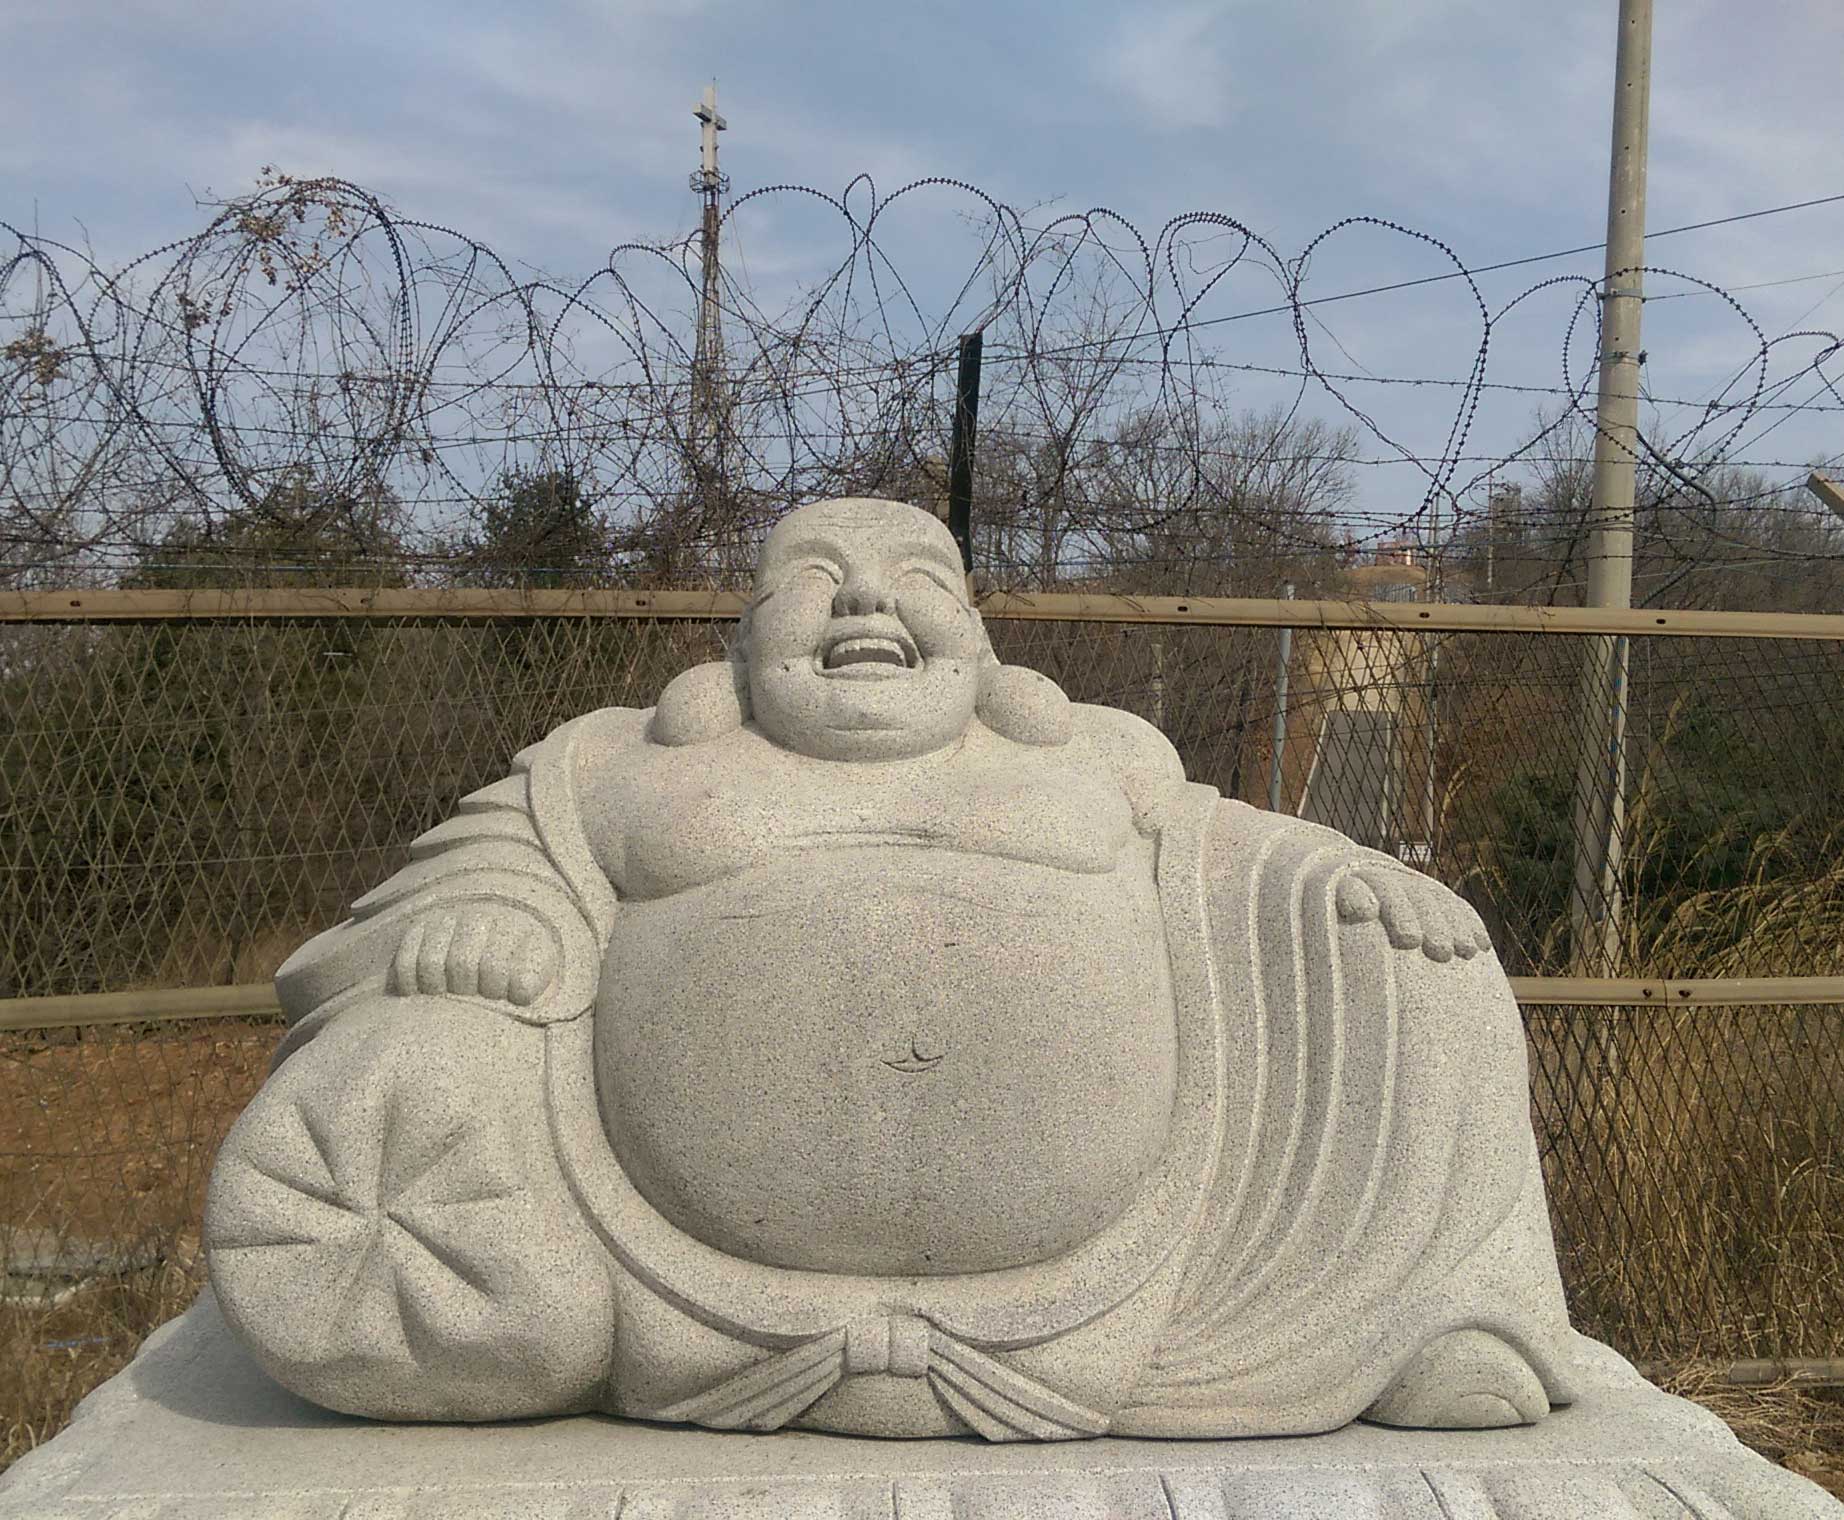 Buddah in front of barb wire fence at the DMZ, South Korea